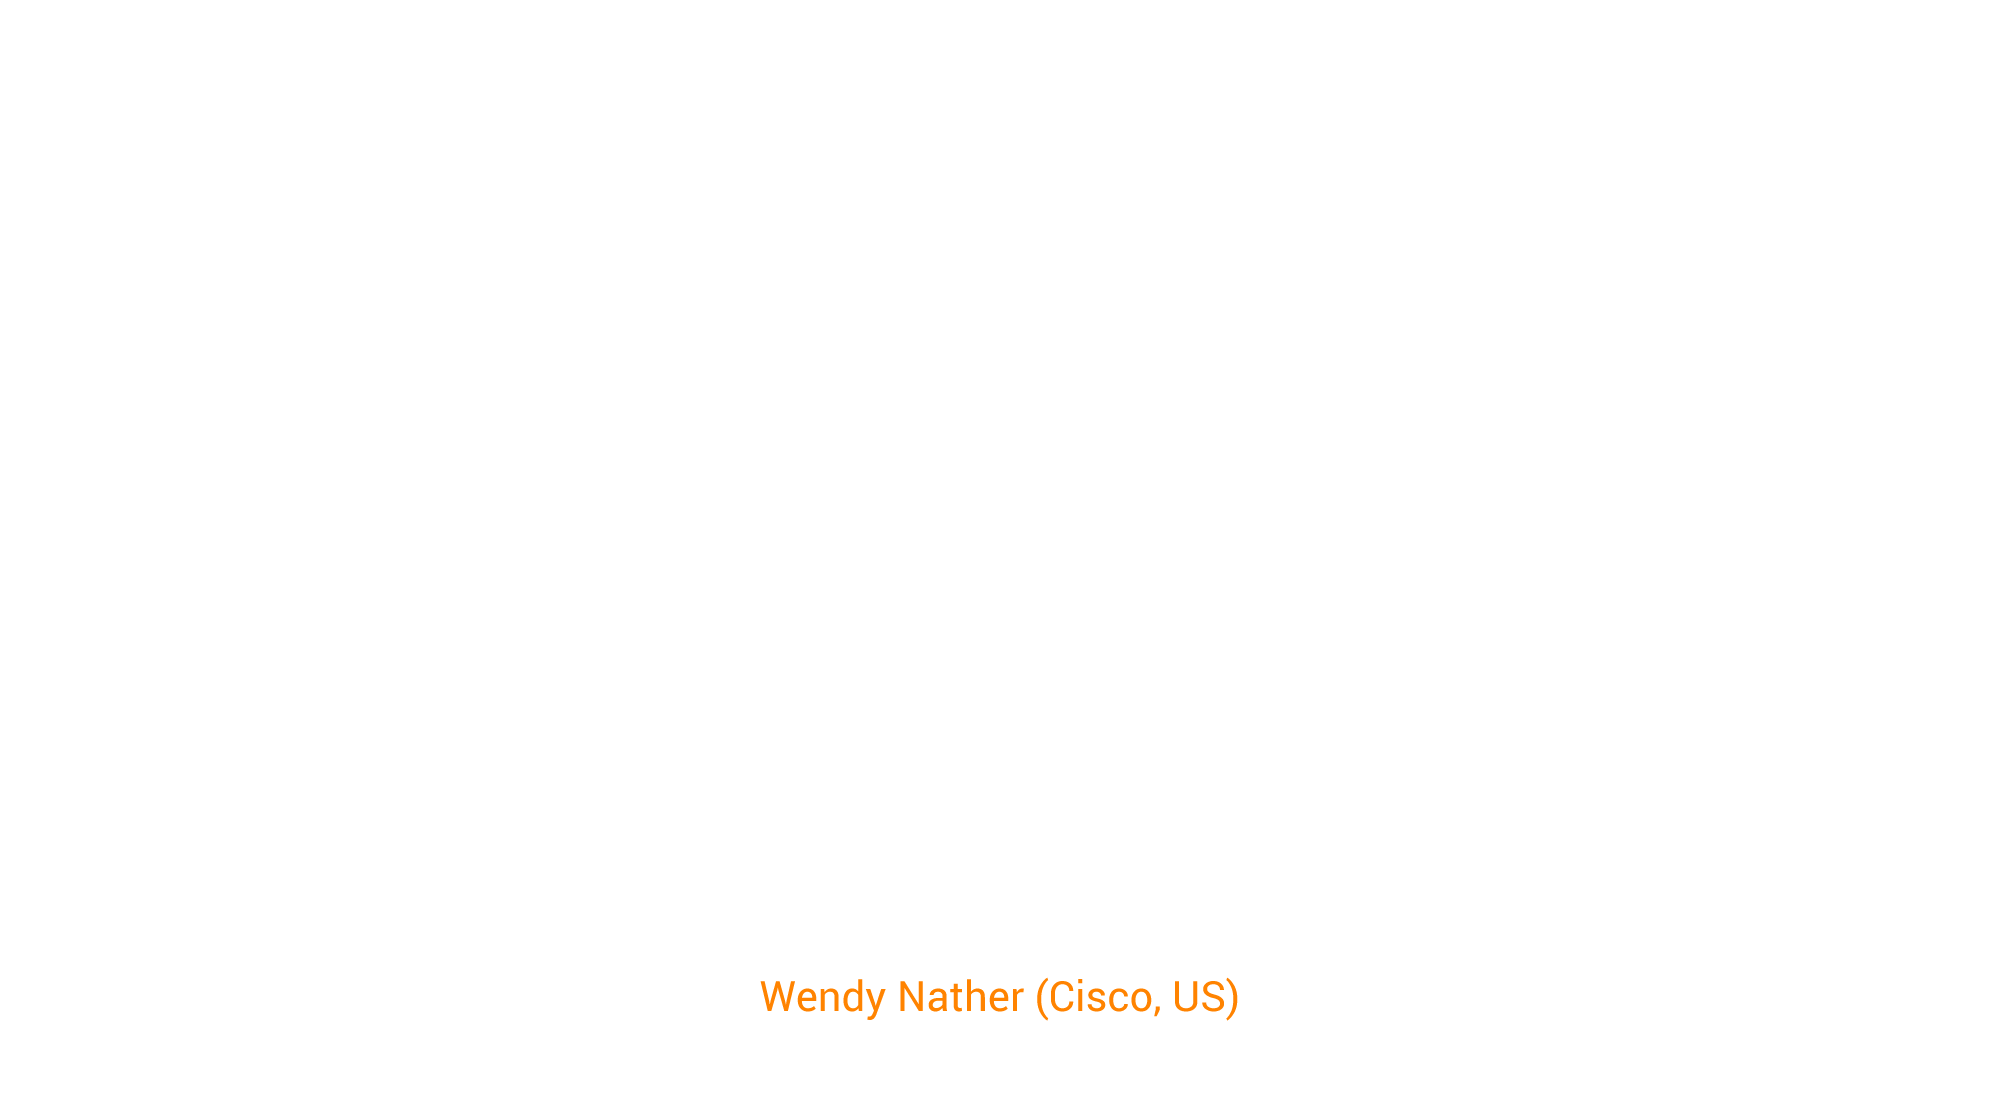 Keynote: What Do We Owe One Another In Cybersecurity?